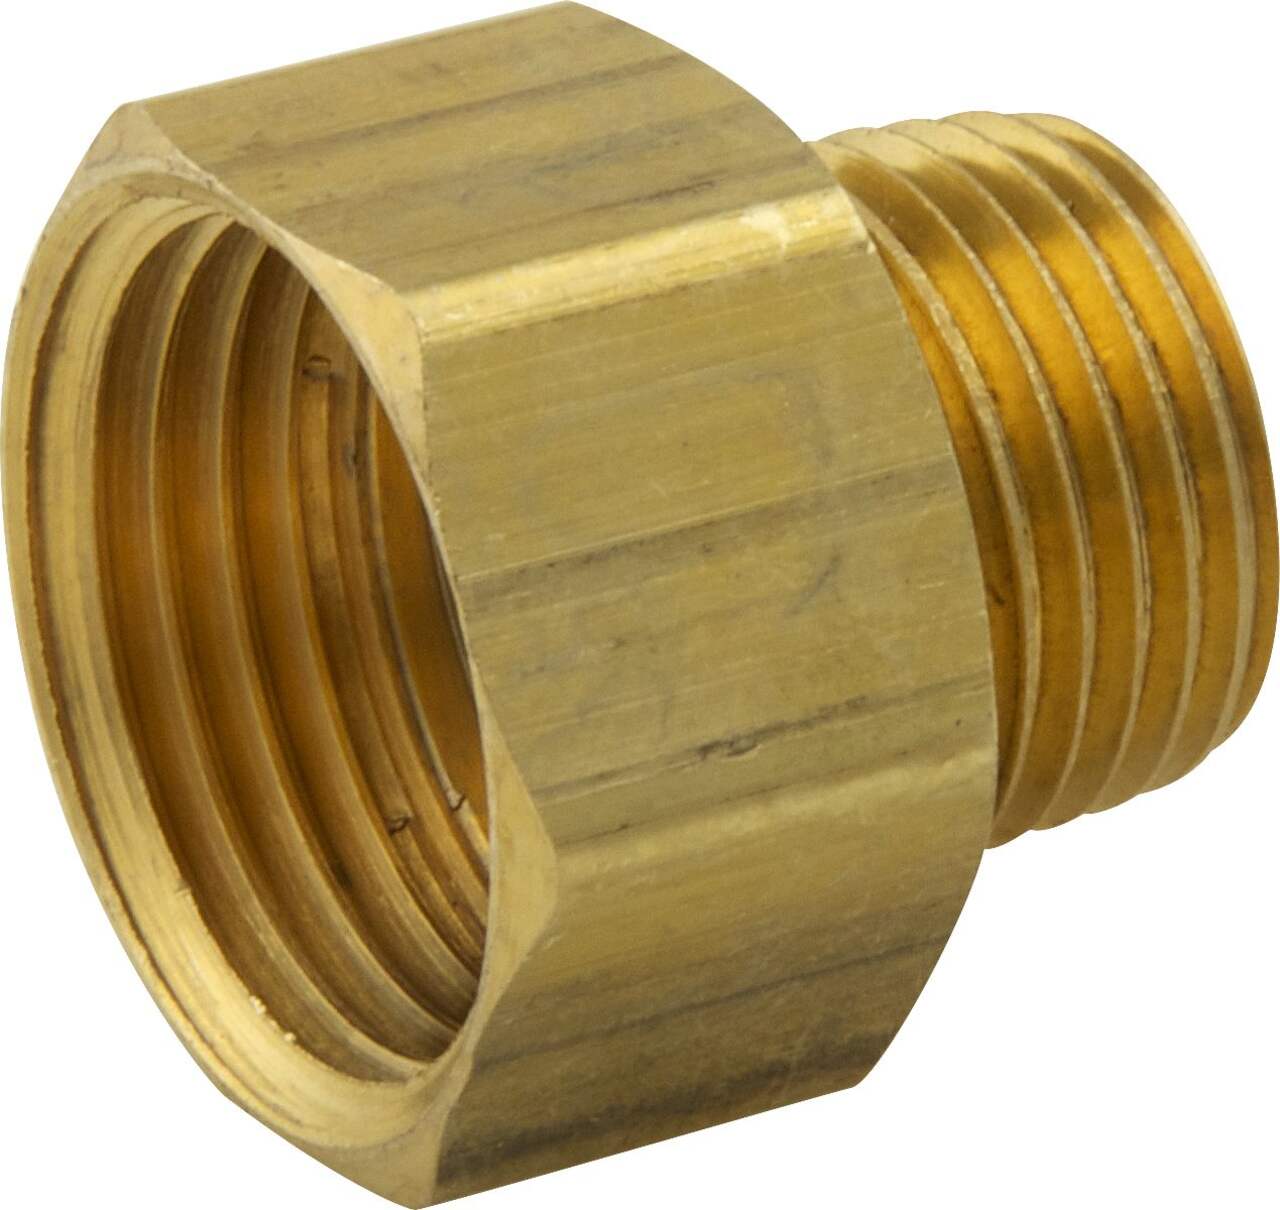 https://media-www.canadiantire.ca/product/fixing/plumbing/rough-plumbing/0630748/hose-adapter-3-4-hose-x-1-2-male-iron-pipe-thread-04c4ef5c-3c82-4d76-b0e4-e199d8c043af-jpgrendition.jpg?imdensity=1&imwidth=640&impolicy=mZoom